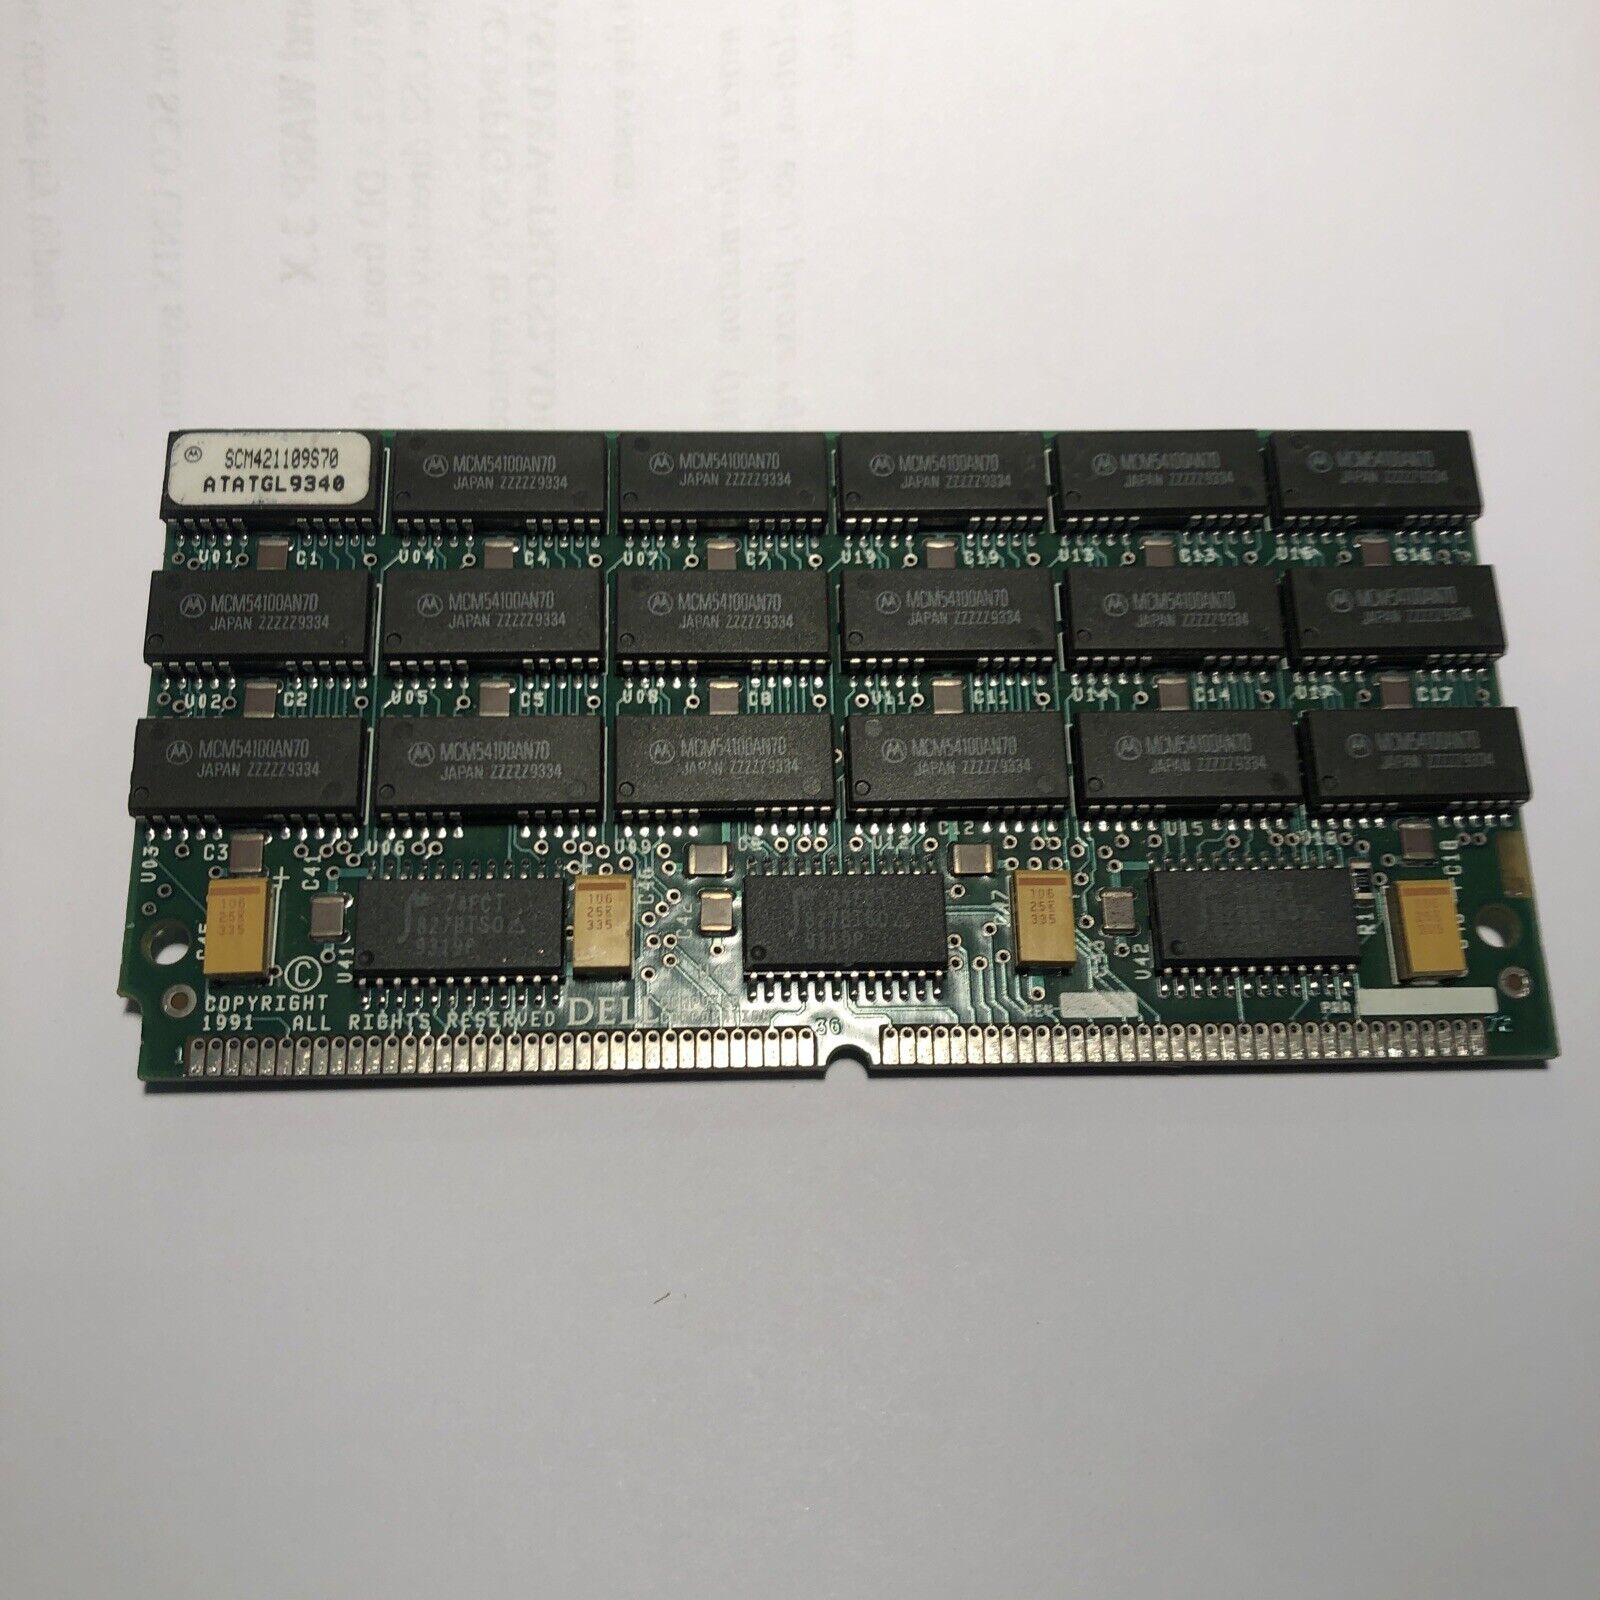 16MB 72 Pin DELL Fast Page FPM MEMORY 70NS Vintage Rare SIMM SCM421109SG70 TALL